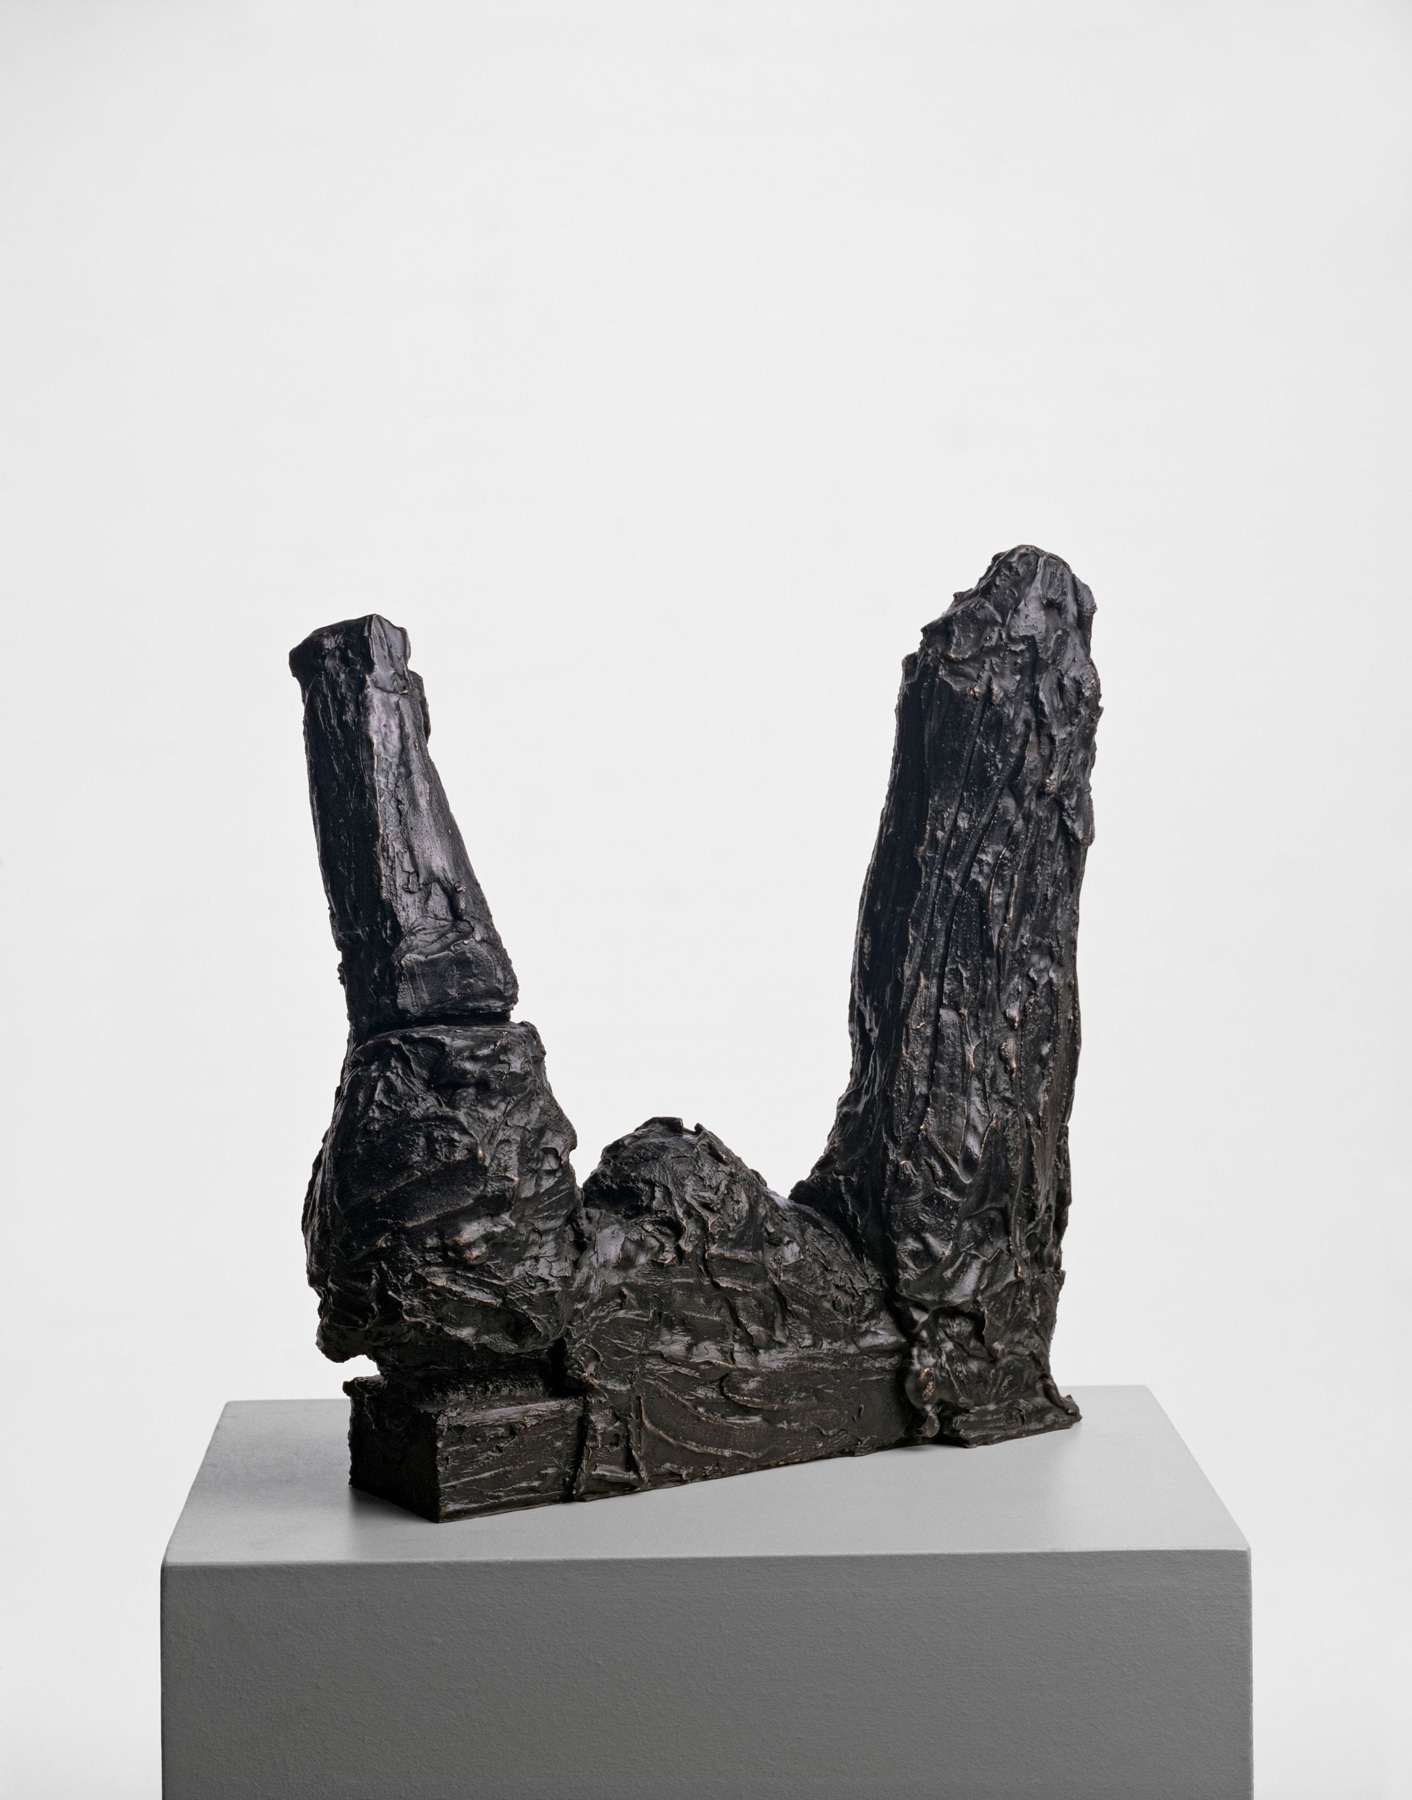 &ldquo;Zwei Arme IV (Two Arms IV)&rdquo;, 1985